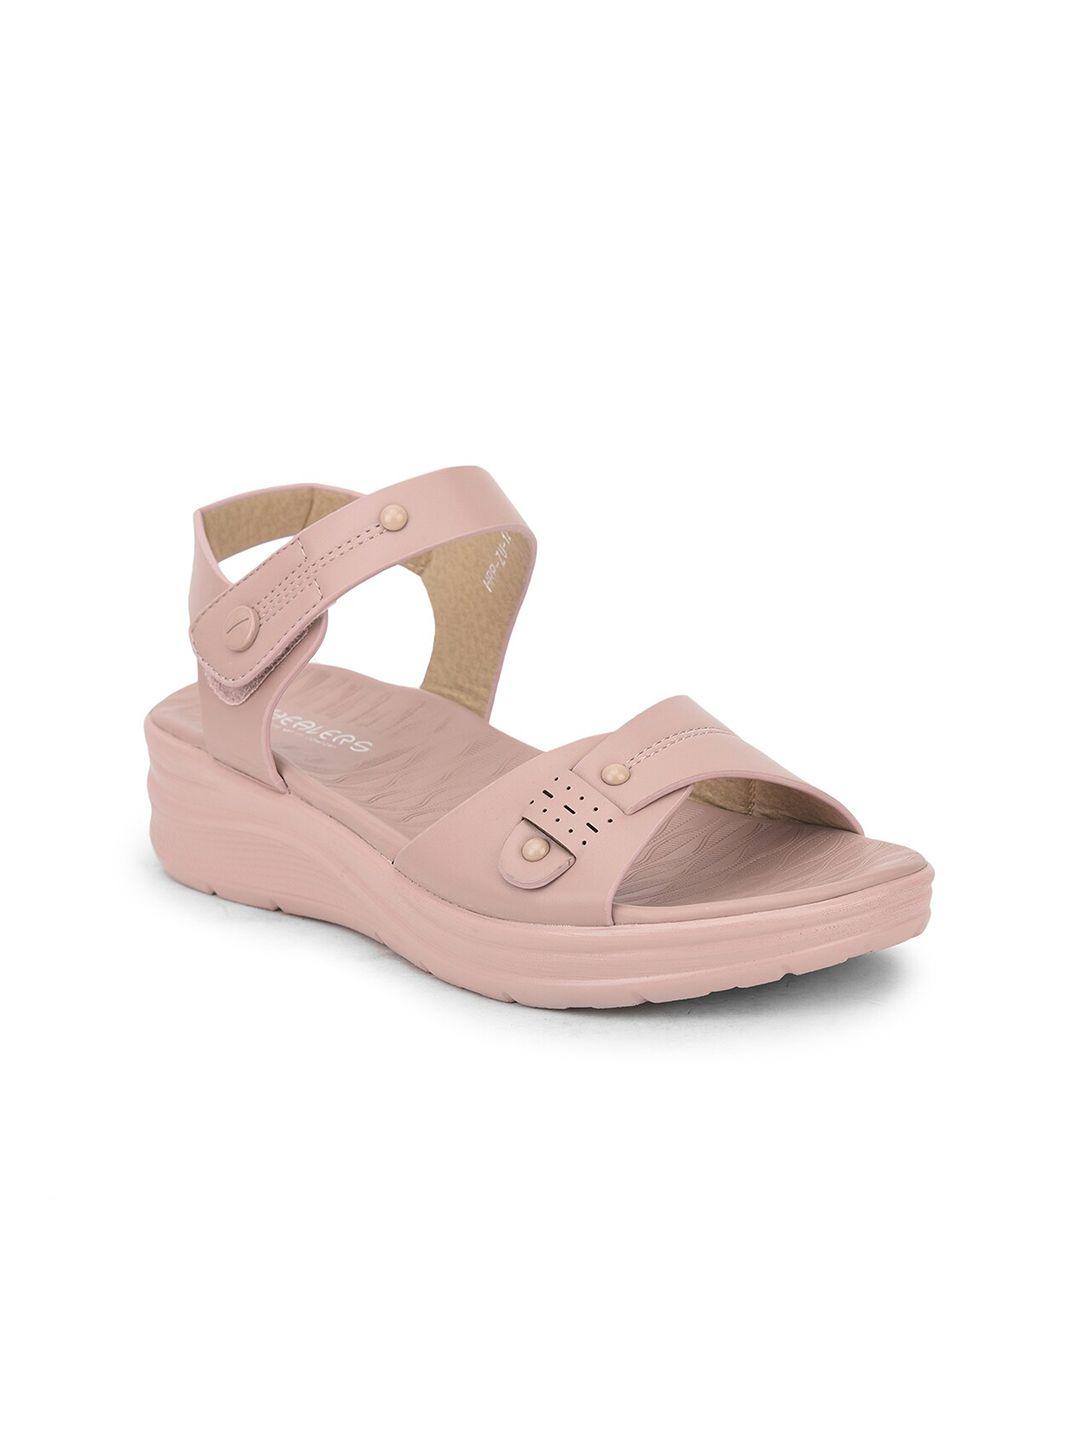 liberty-women-pink-open-toe-flats-with-buckles